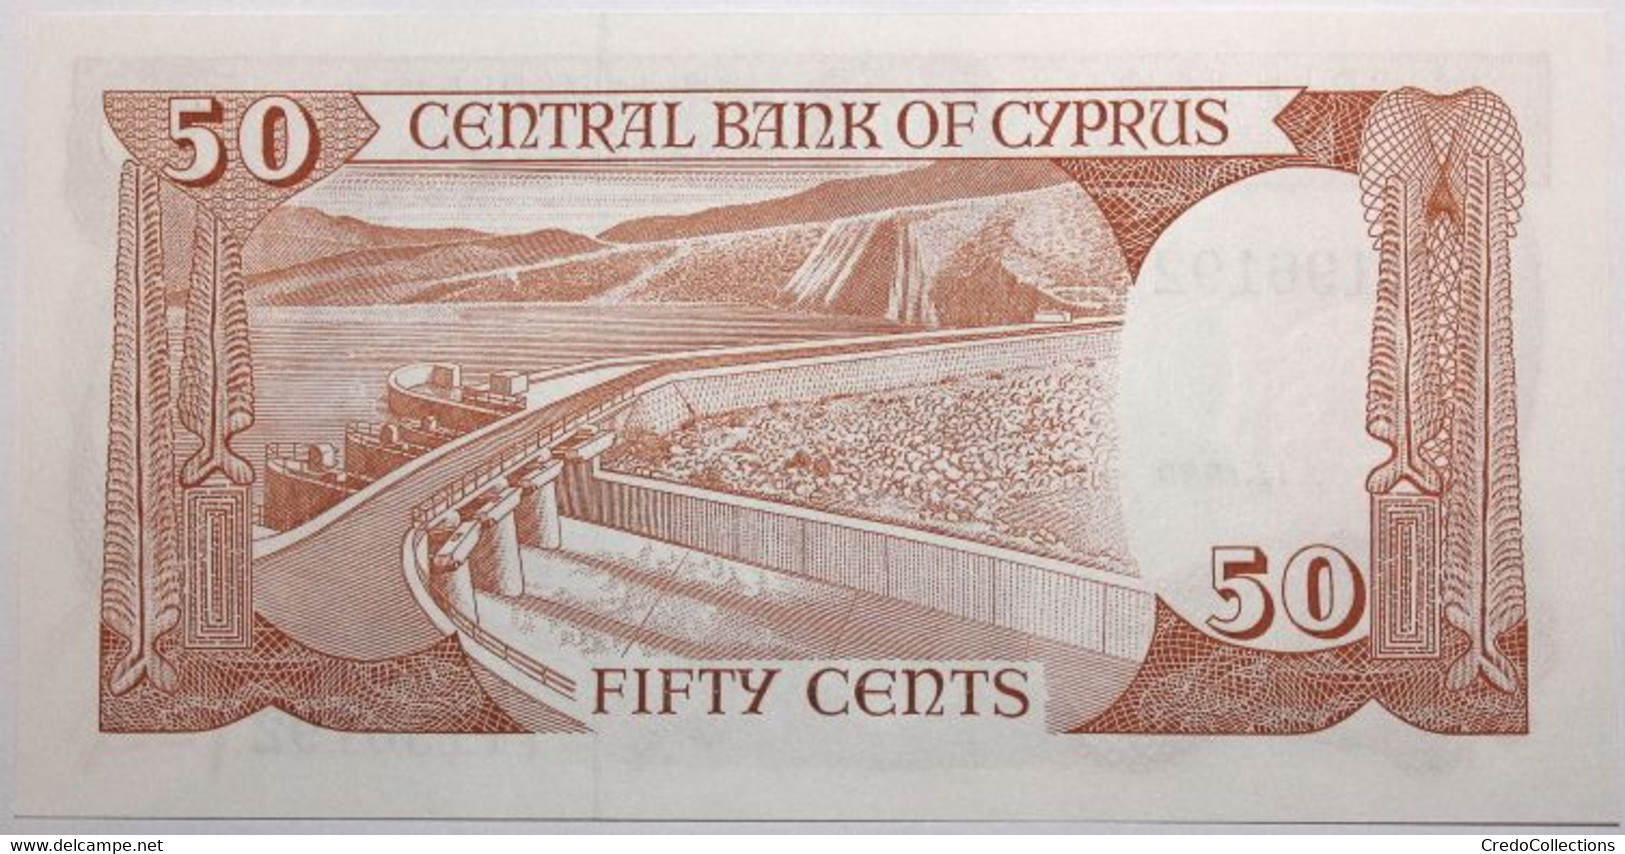 Chypre - 50 Cents - 1989 - PICK 52a.3 - NEUF - Cyprus